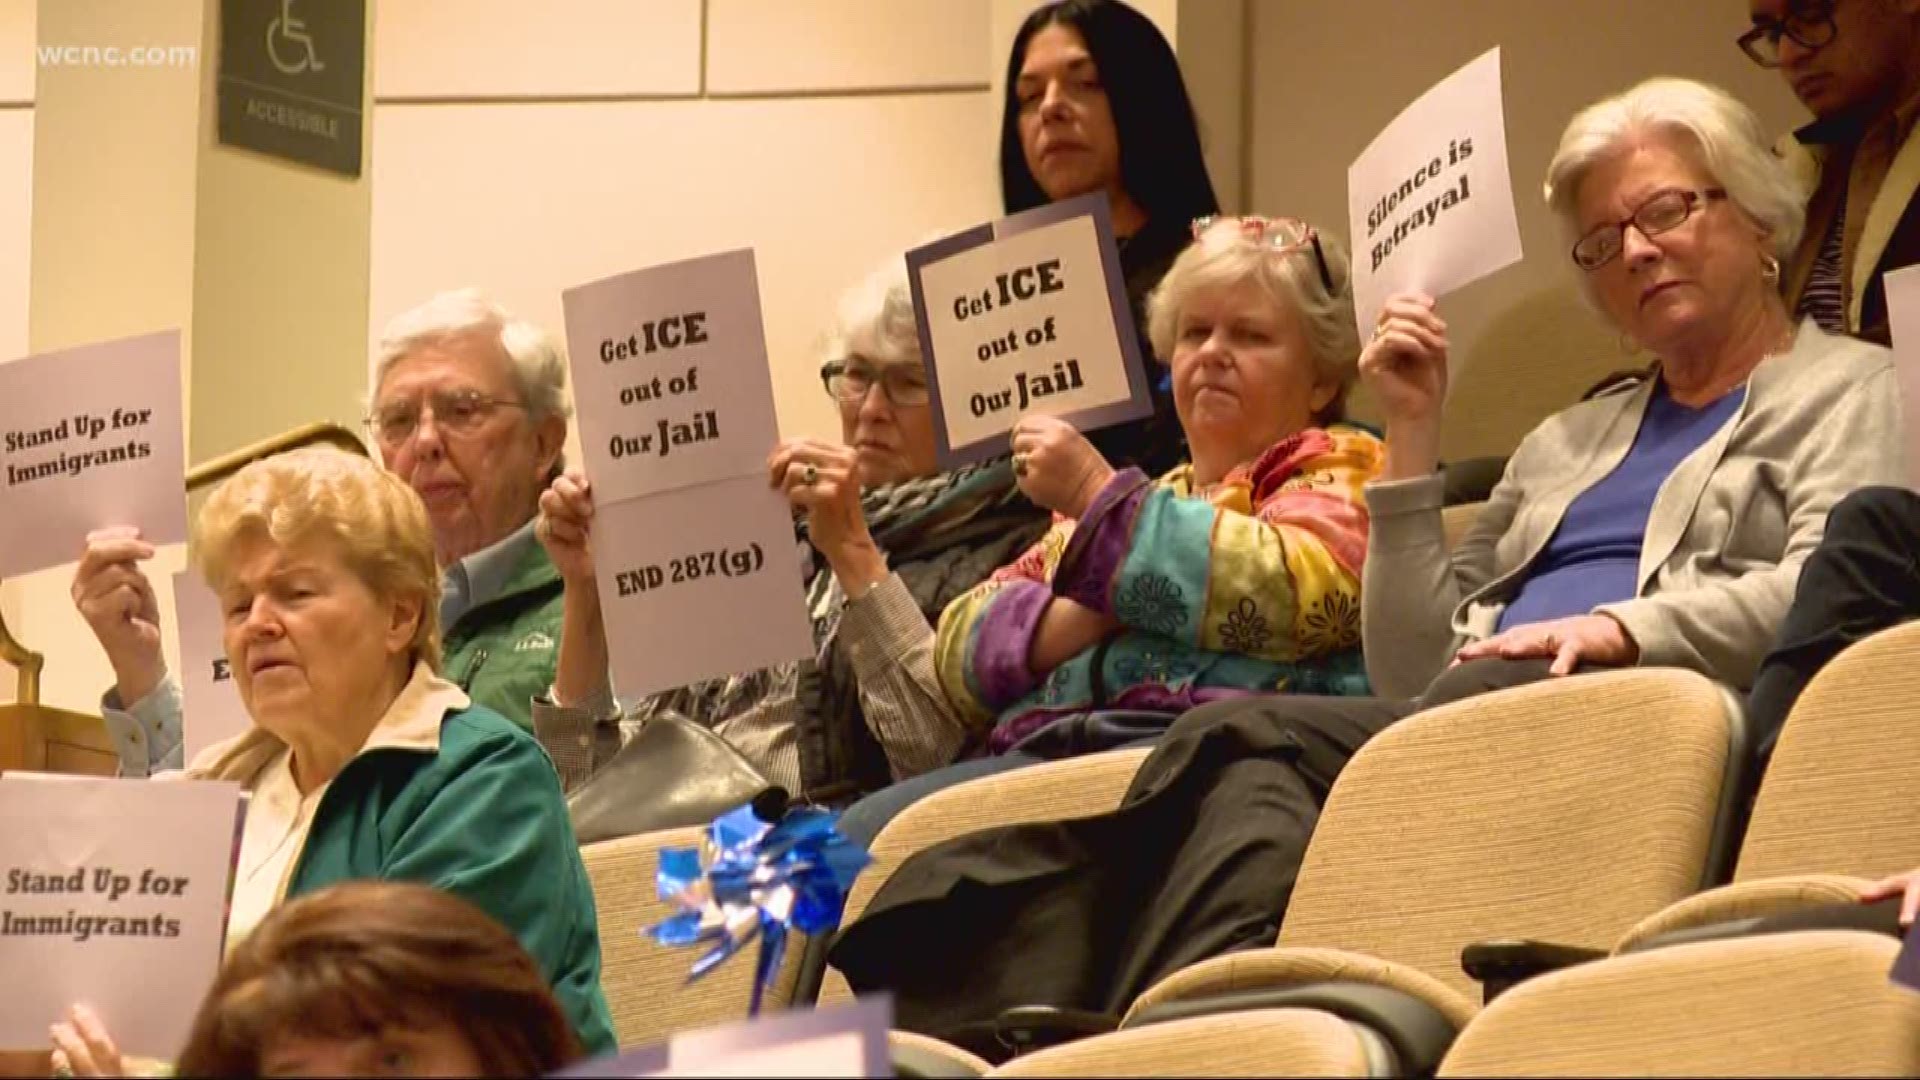 Local activists on both sides of the immigration issue spoke out at Tuesday night's Mecklenburg County Commissioners meeting.